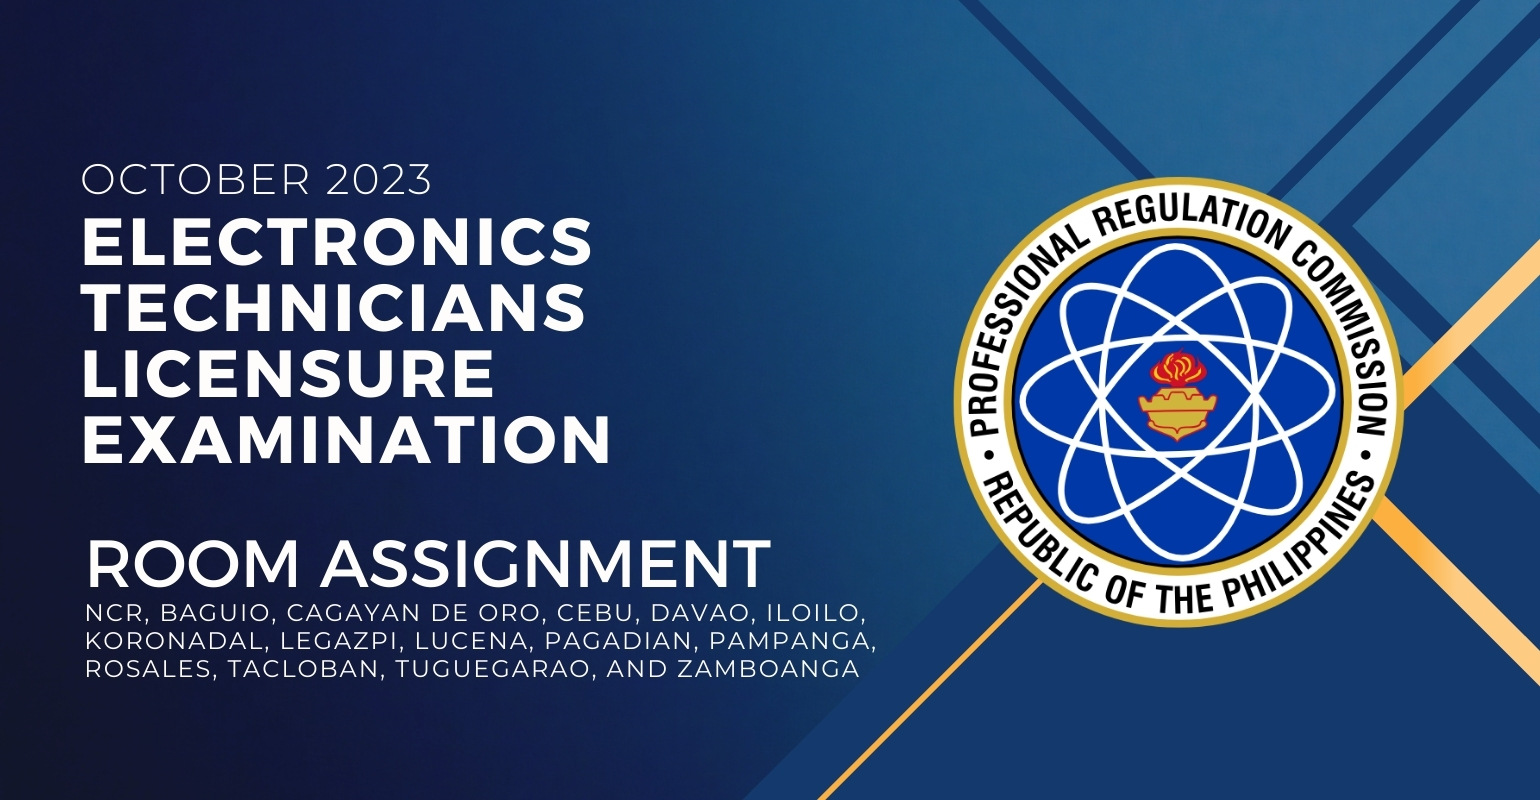 Room Assignment — October 2023 Electronic Technicians Licensure Exam